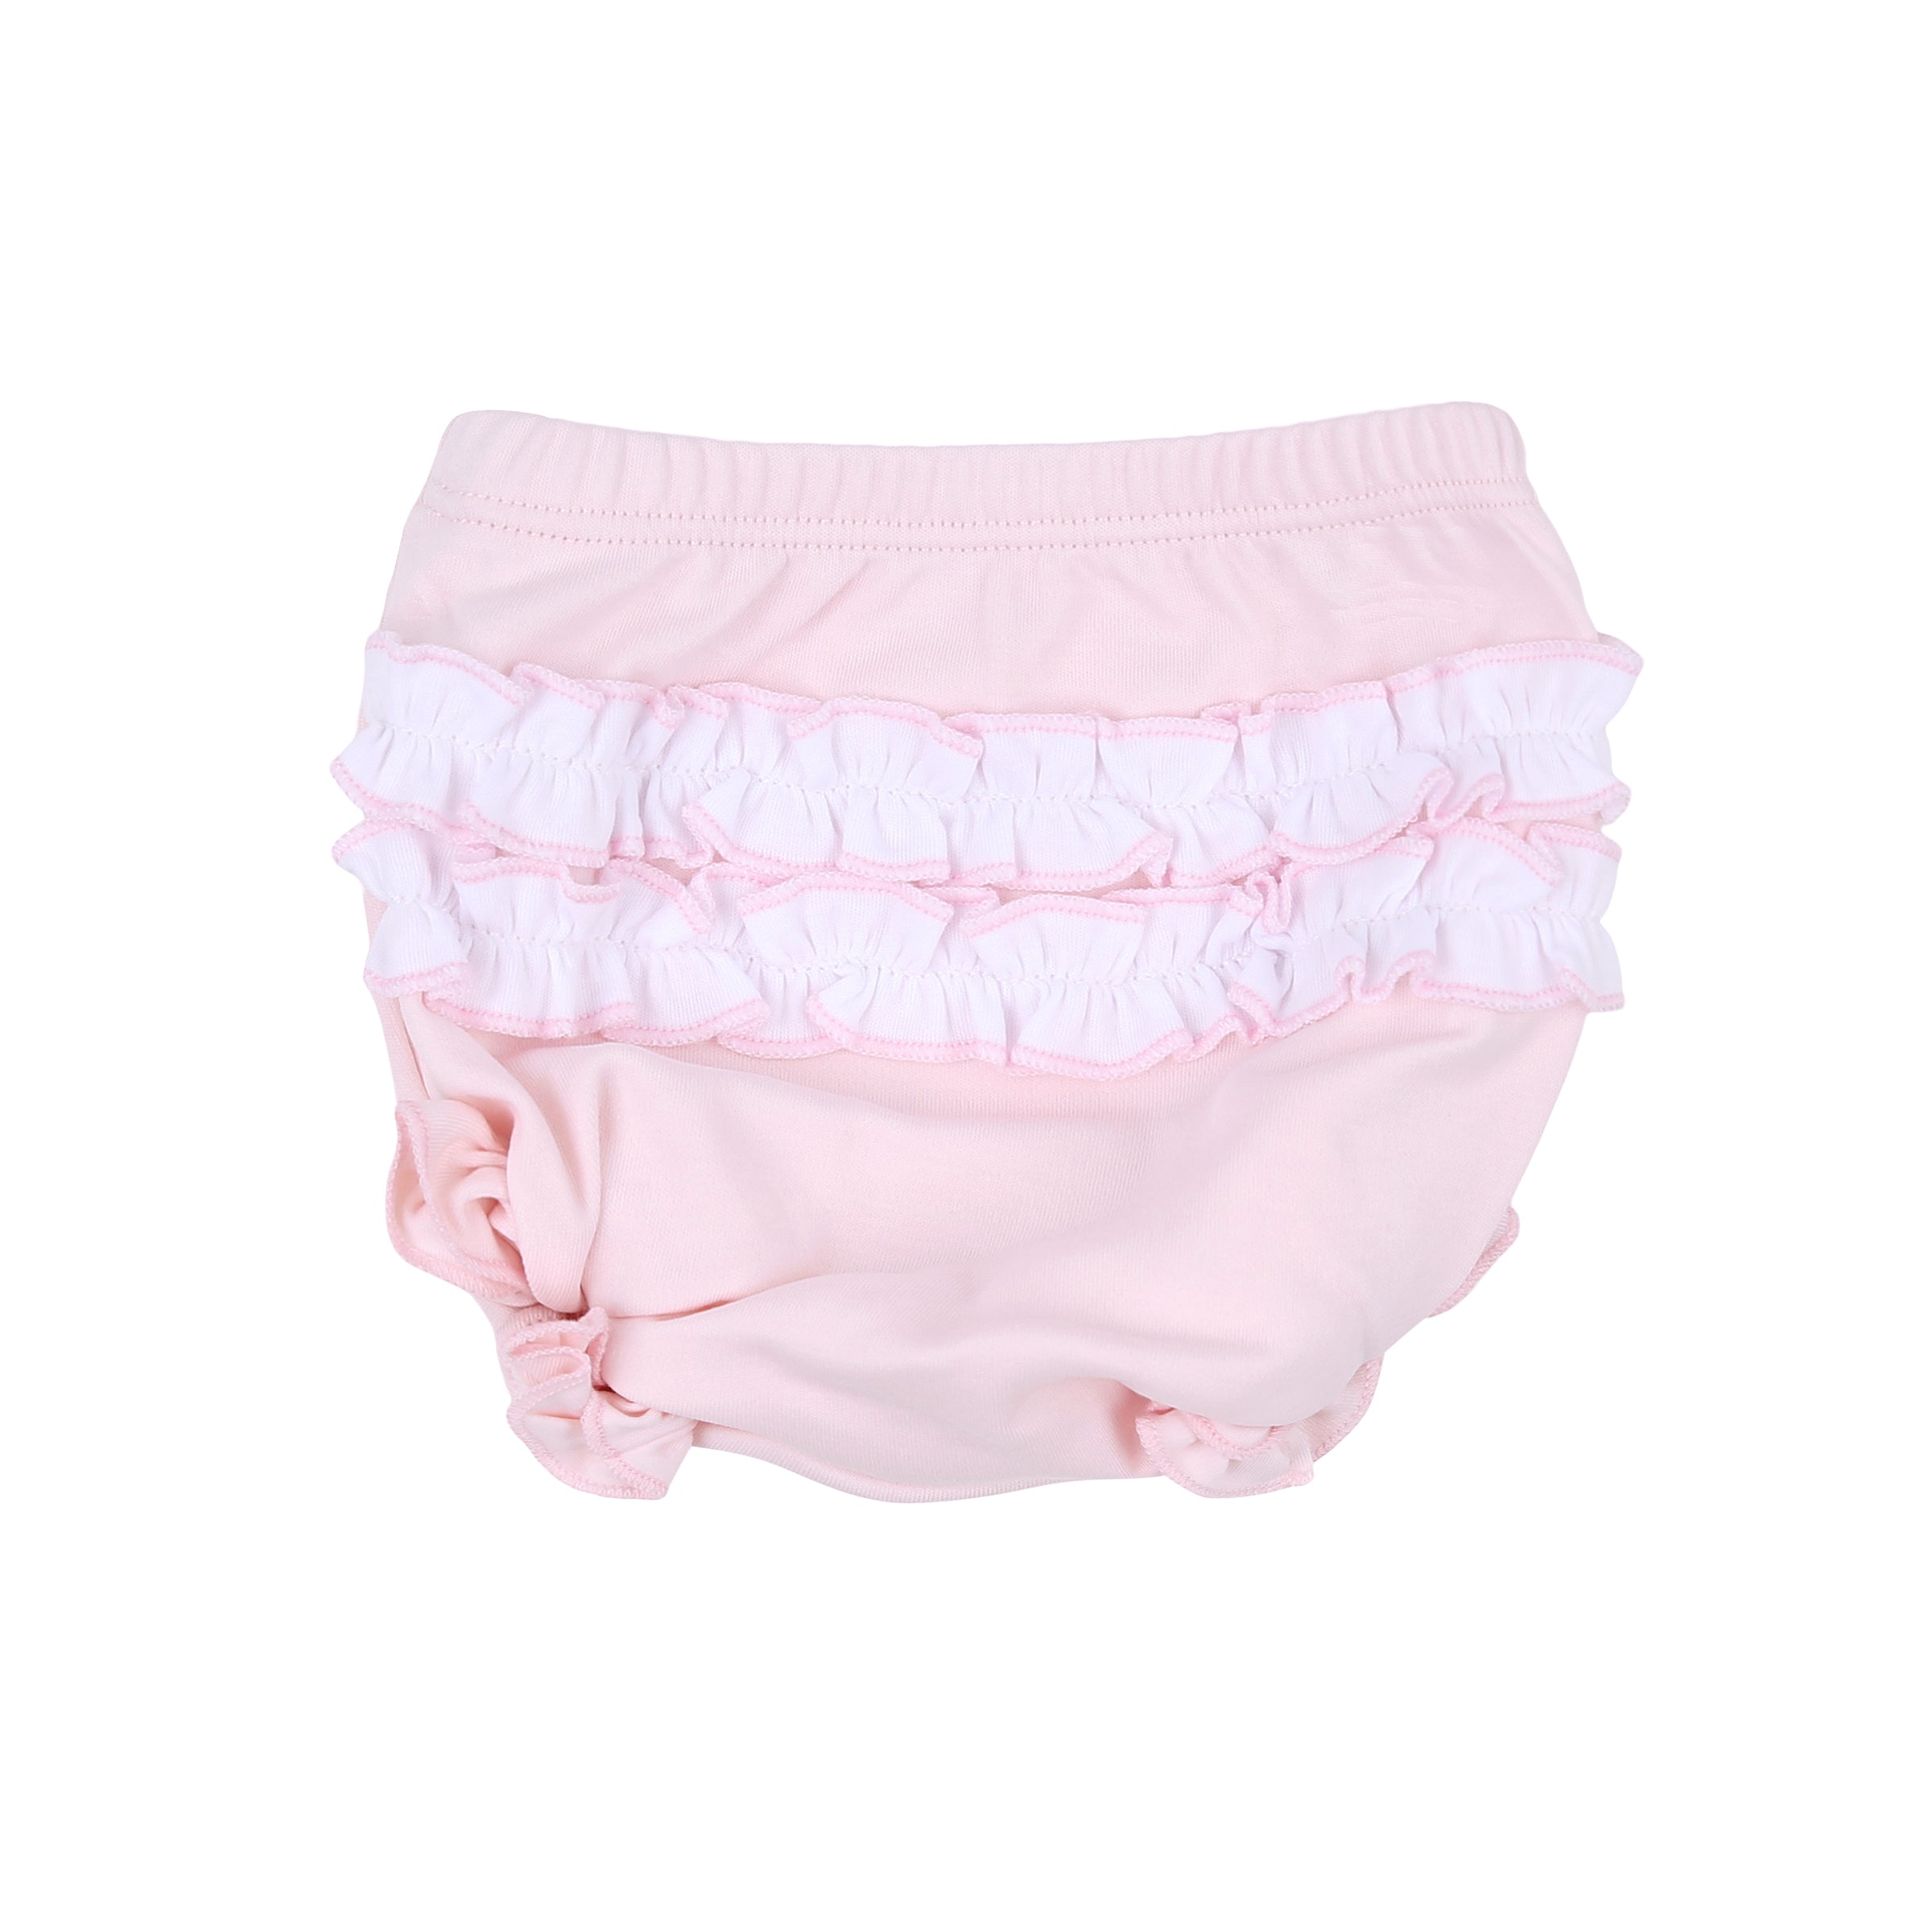 Just Ducky Classics Smocked Diaper Cover Set - Pink